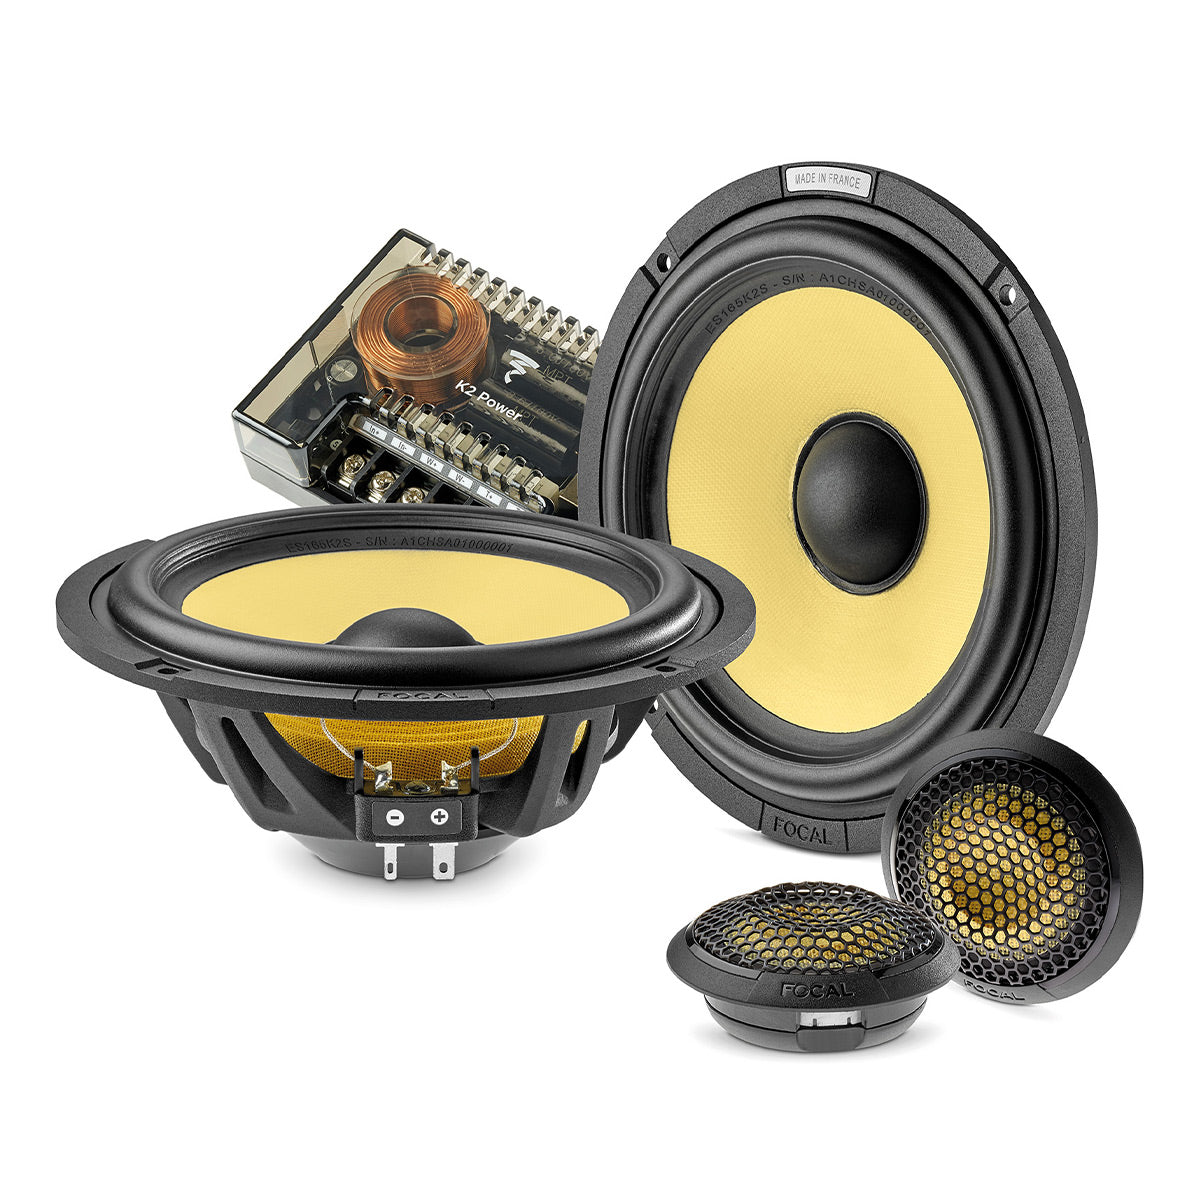 Focal ES 165 K2S 6.5" K2 EVO Shallow 2-Way Component Speaker Kit with TKME Tweeters & Compact Crossovers